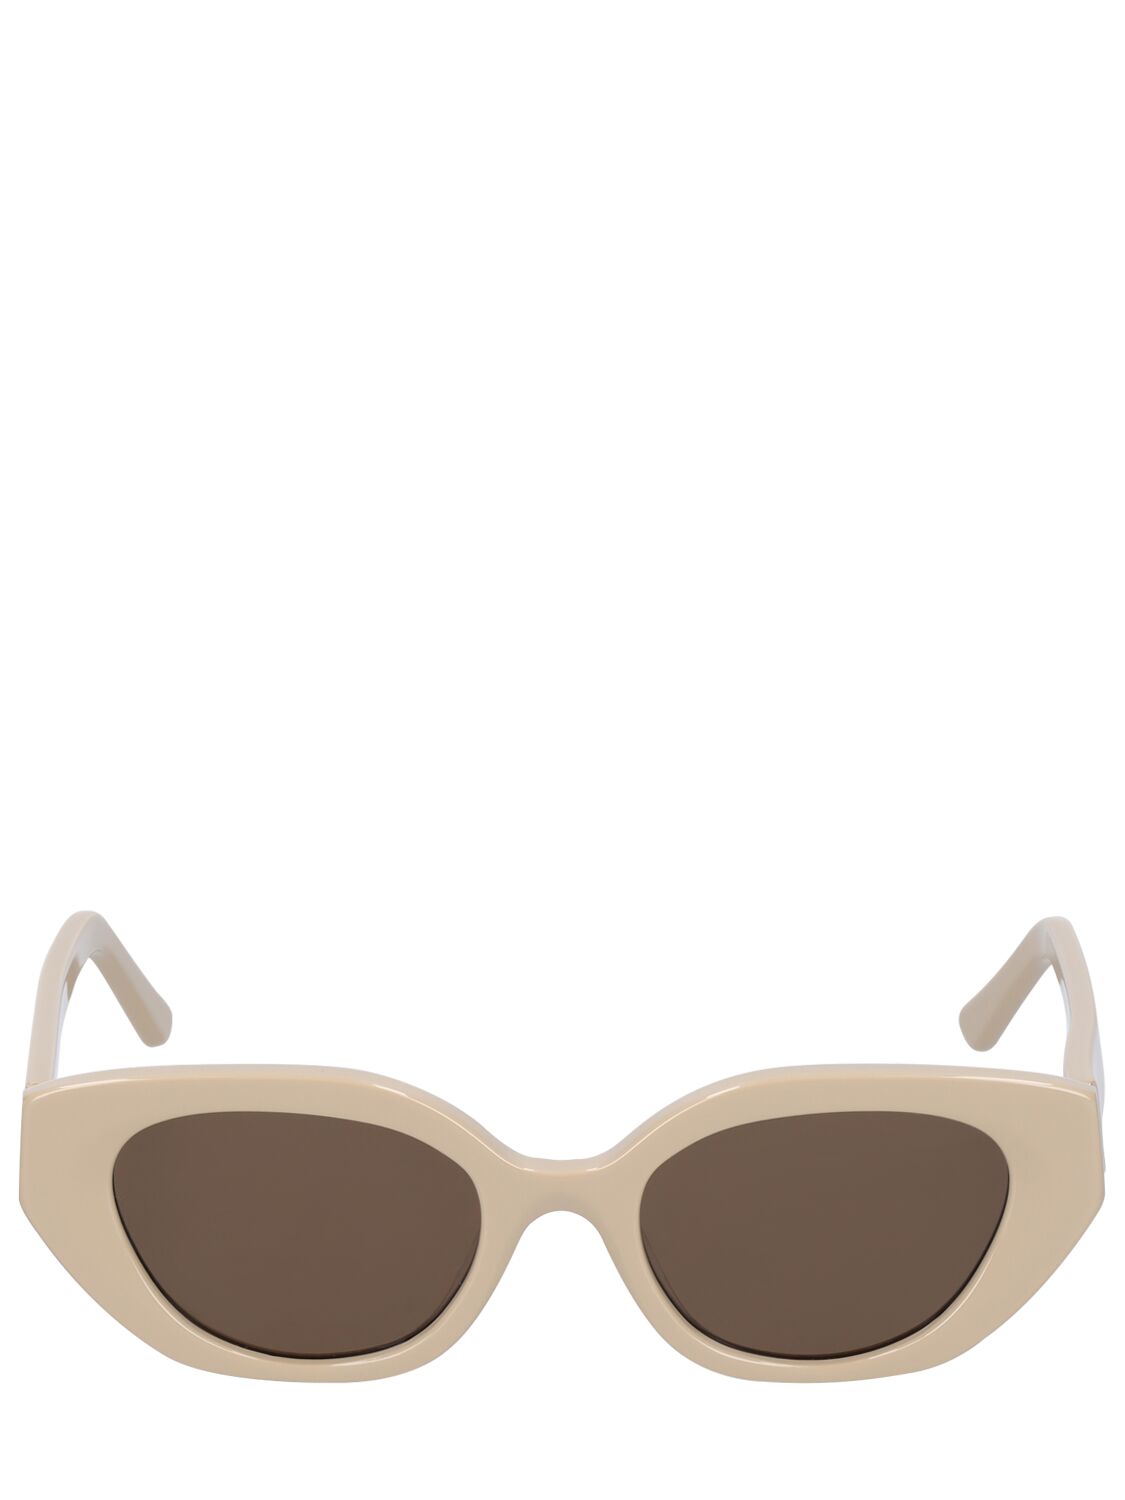 Image of Le Chat Cat-eye Acetate Sunglasses